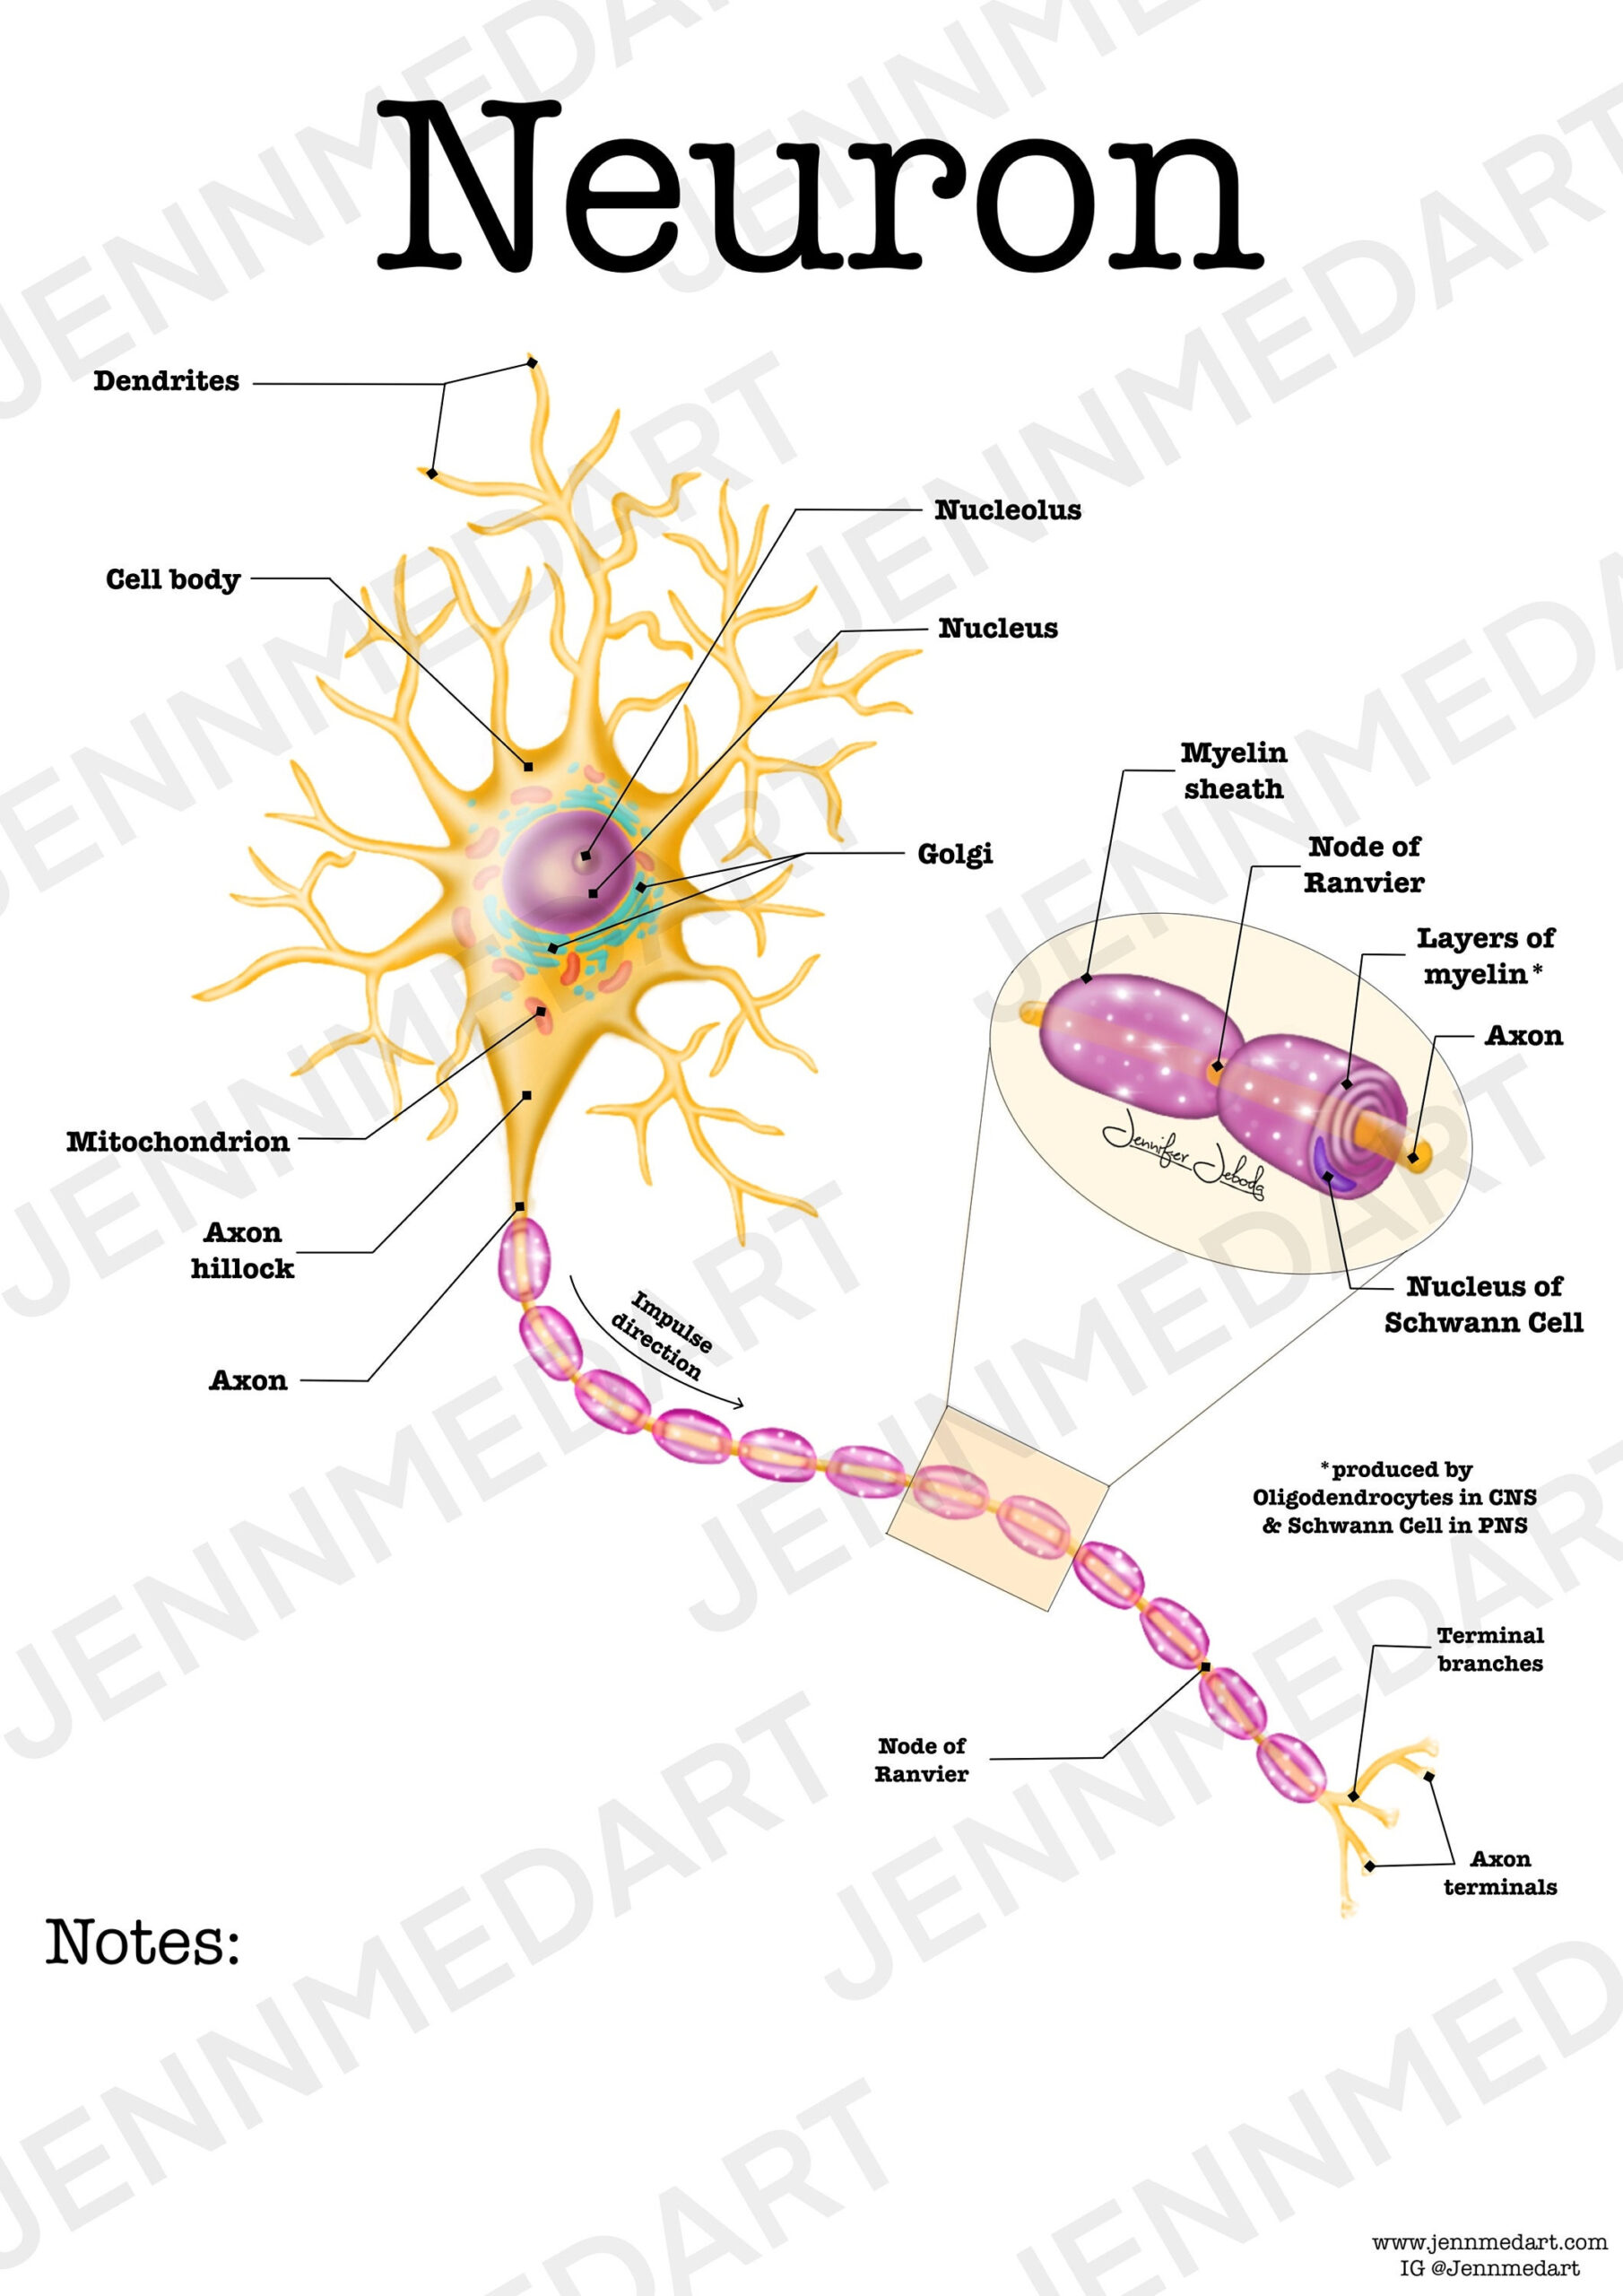 Neuron Anatomy Worksheet 3 in 1 Set A Labeled Coloring Page